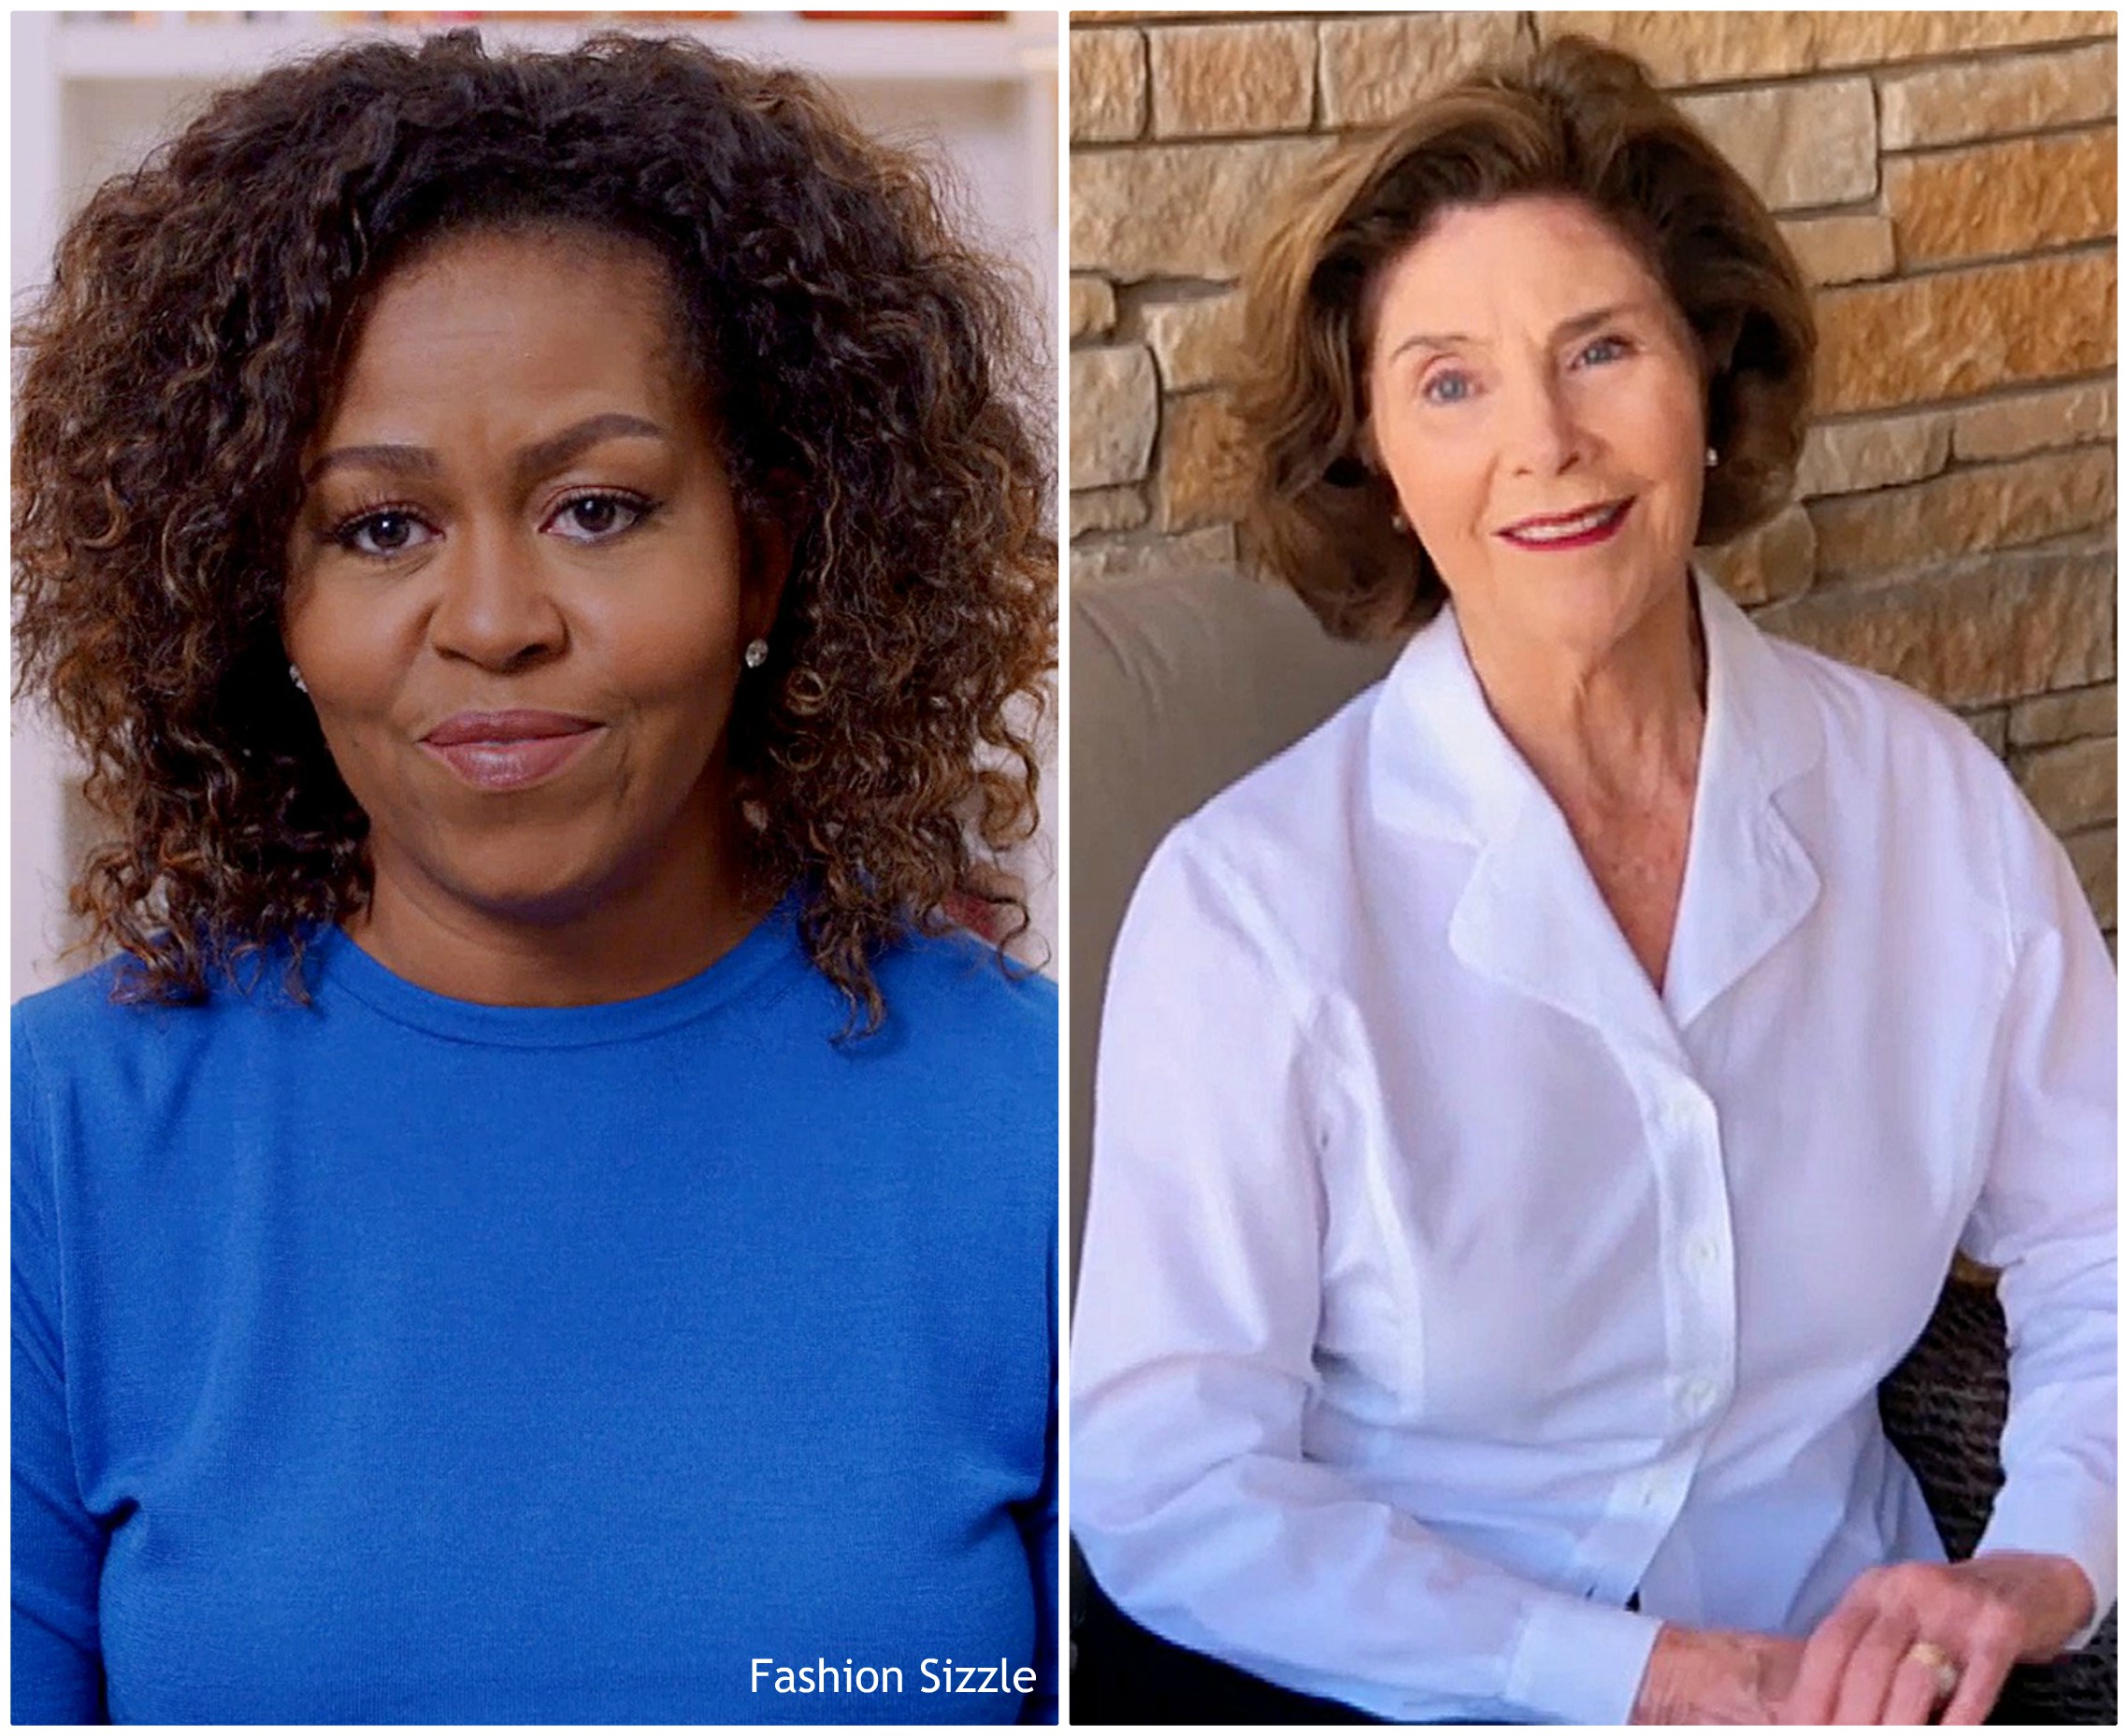 former-first-ladies-laura-bush-michelle-obama-shares-essage-of-hope-global-citizen-concert